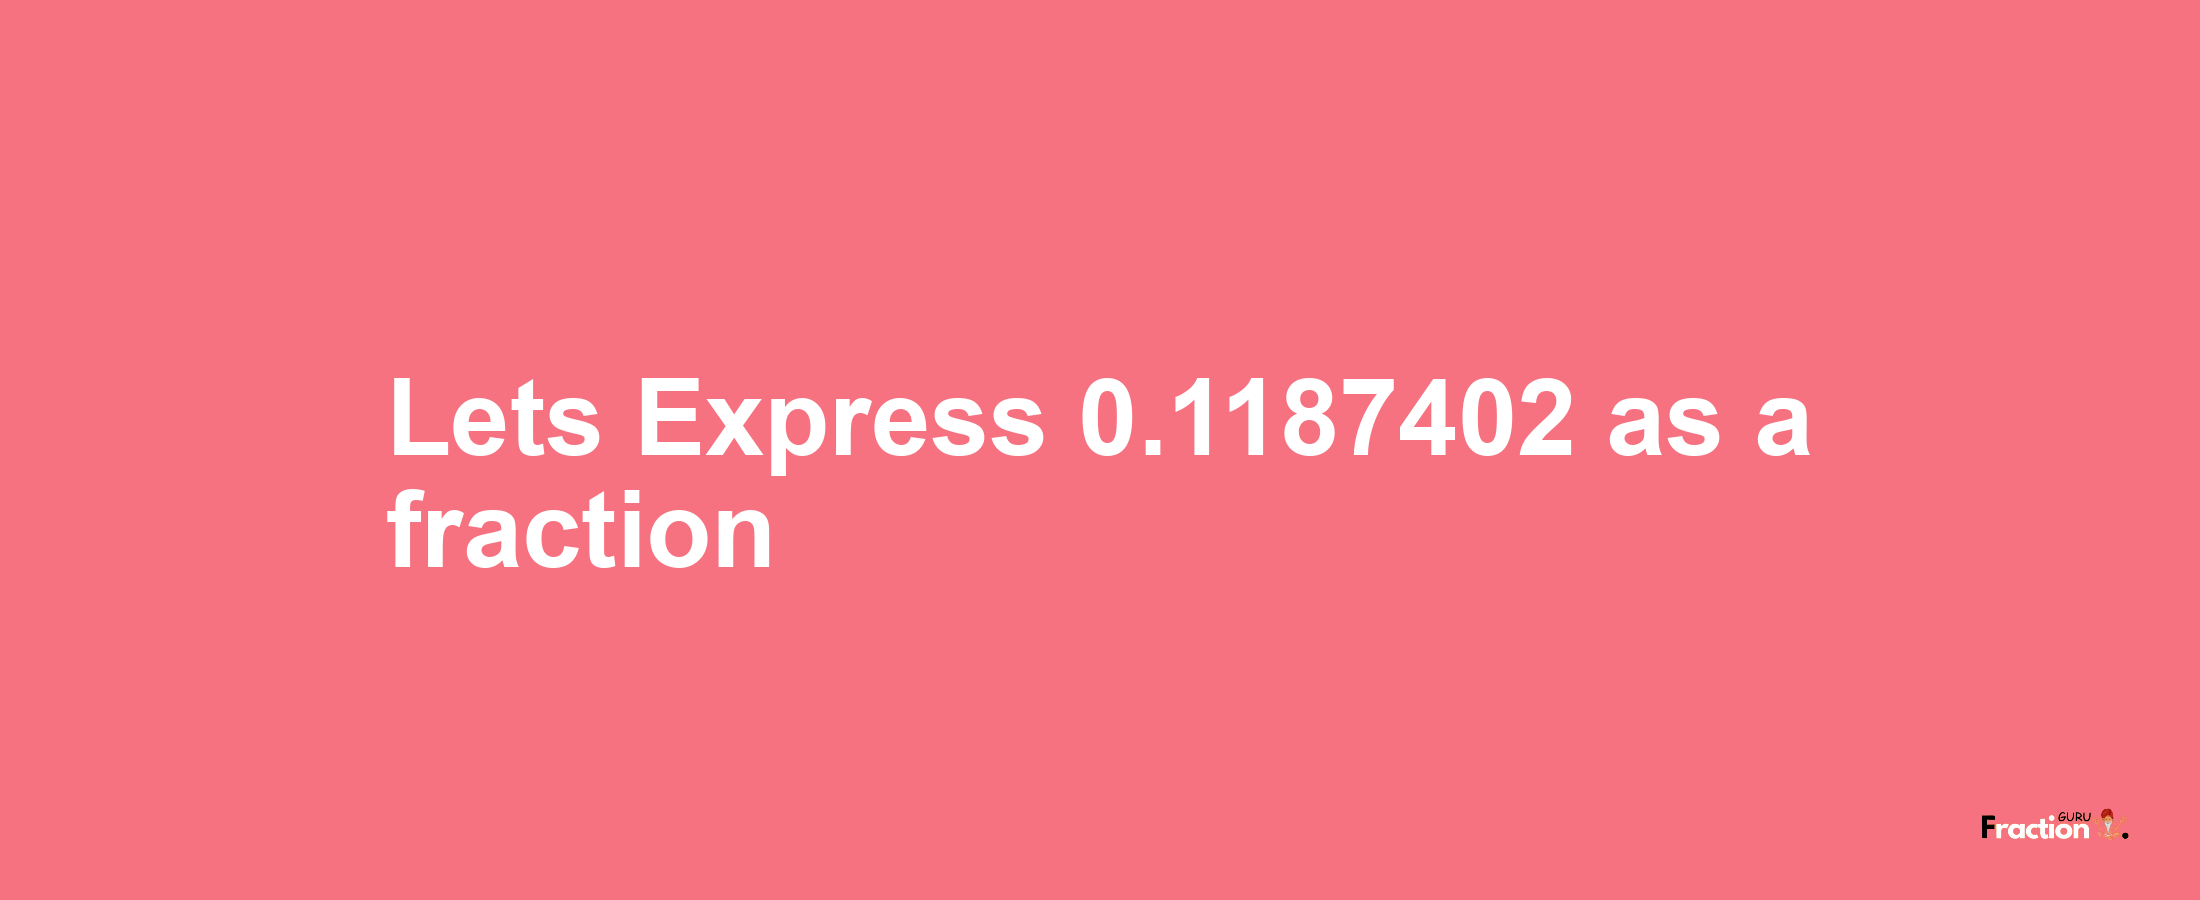 Lets Express 0.1187402 as afraction